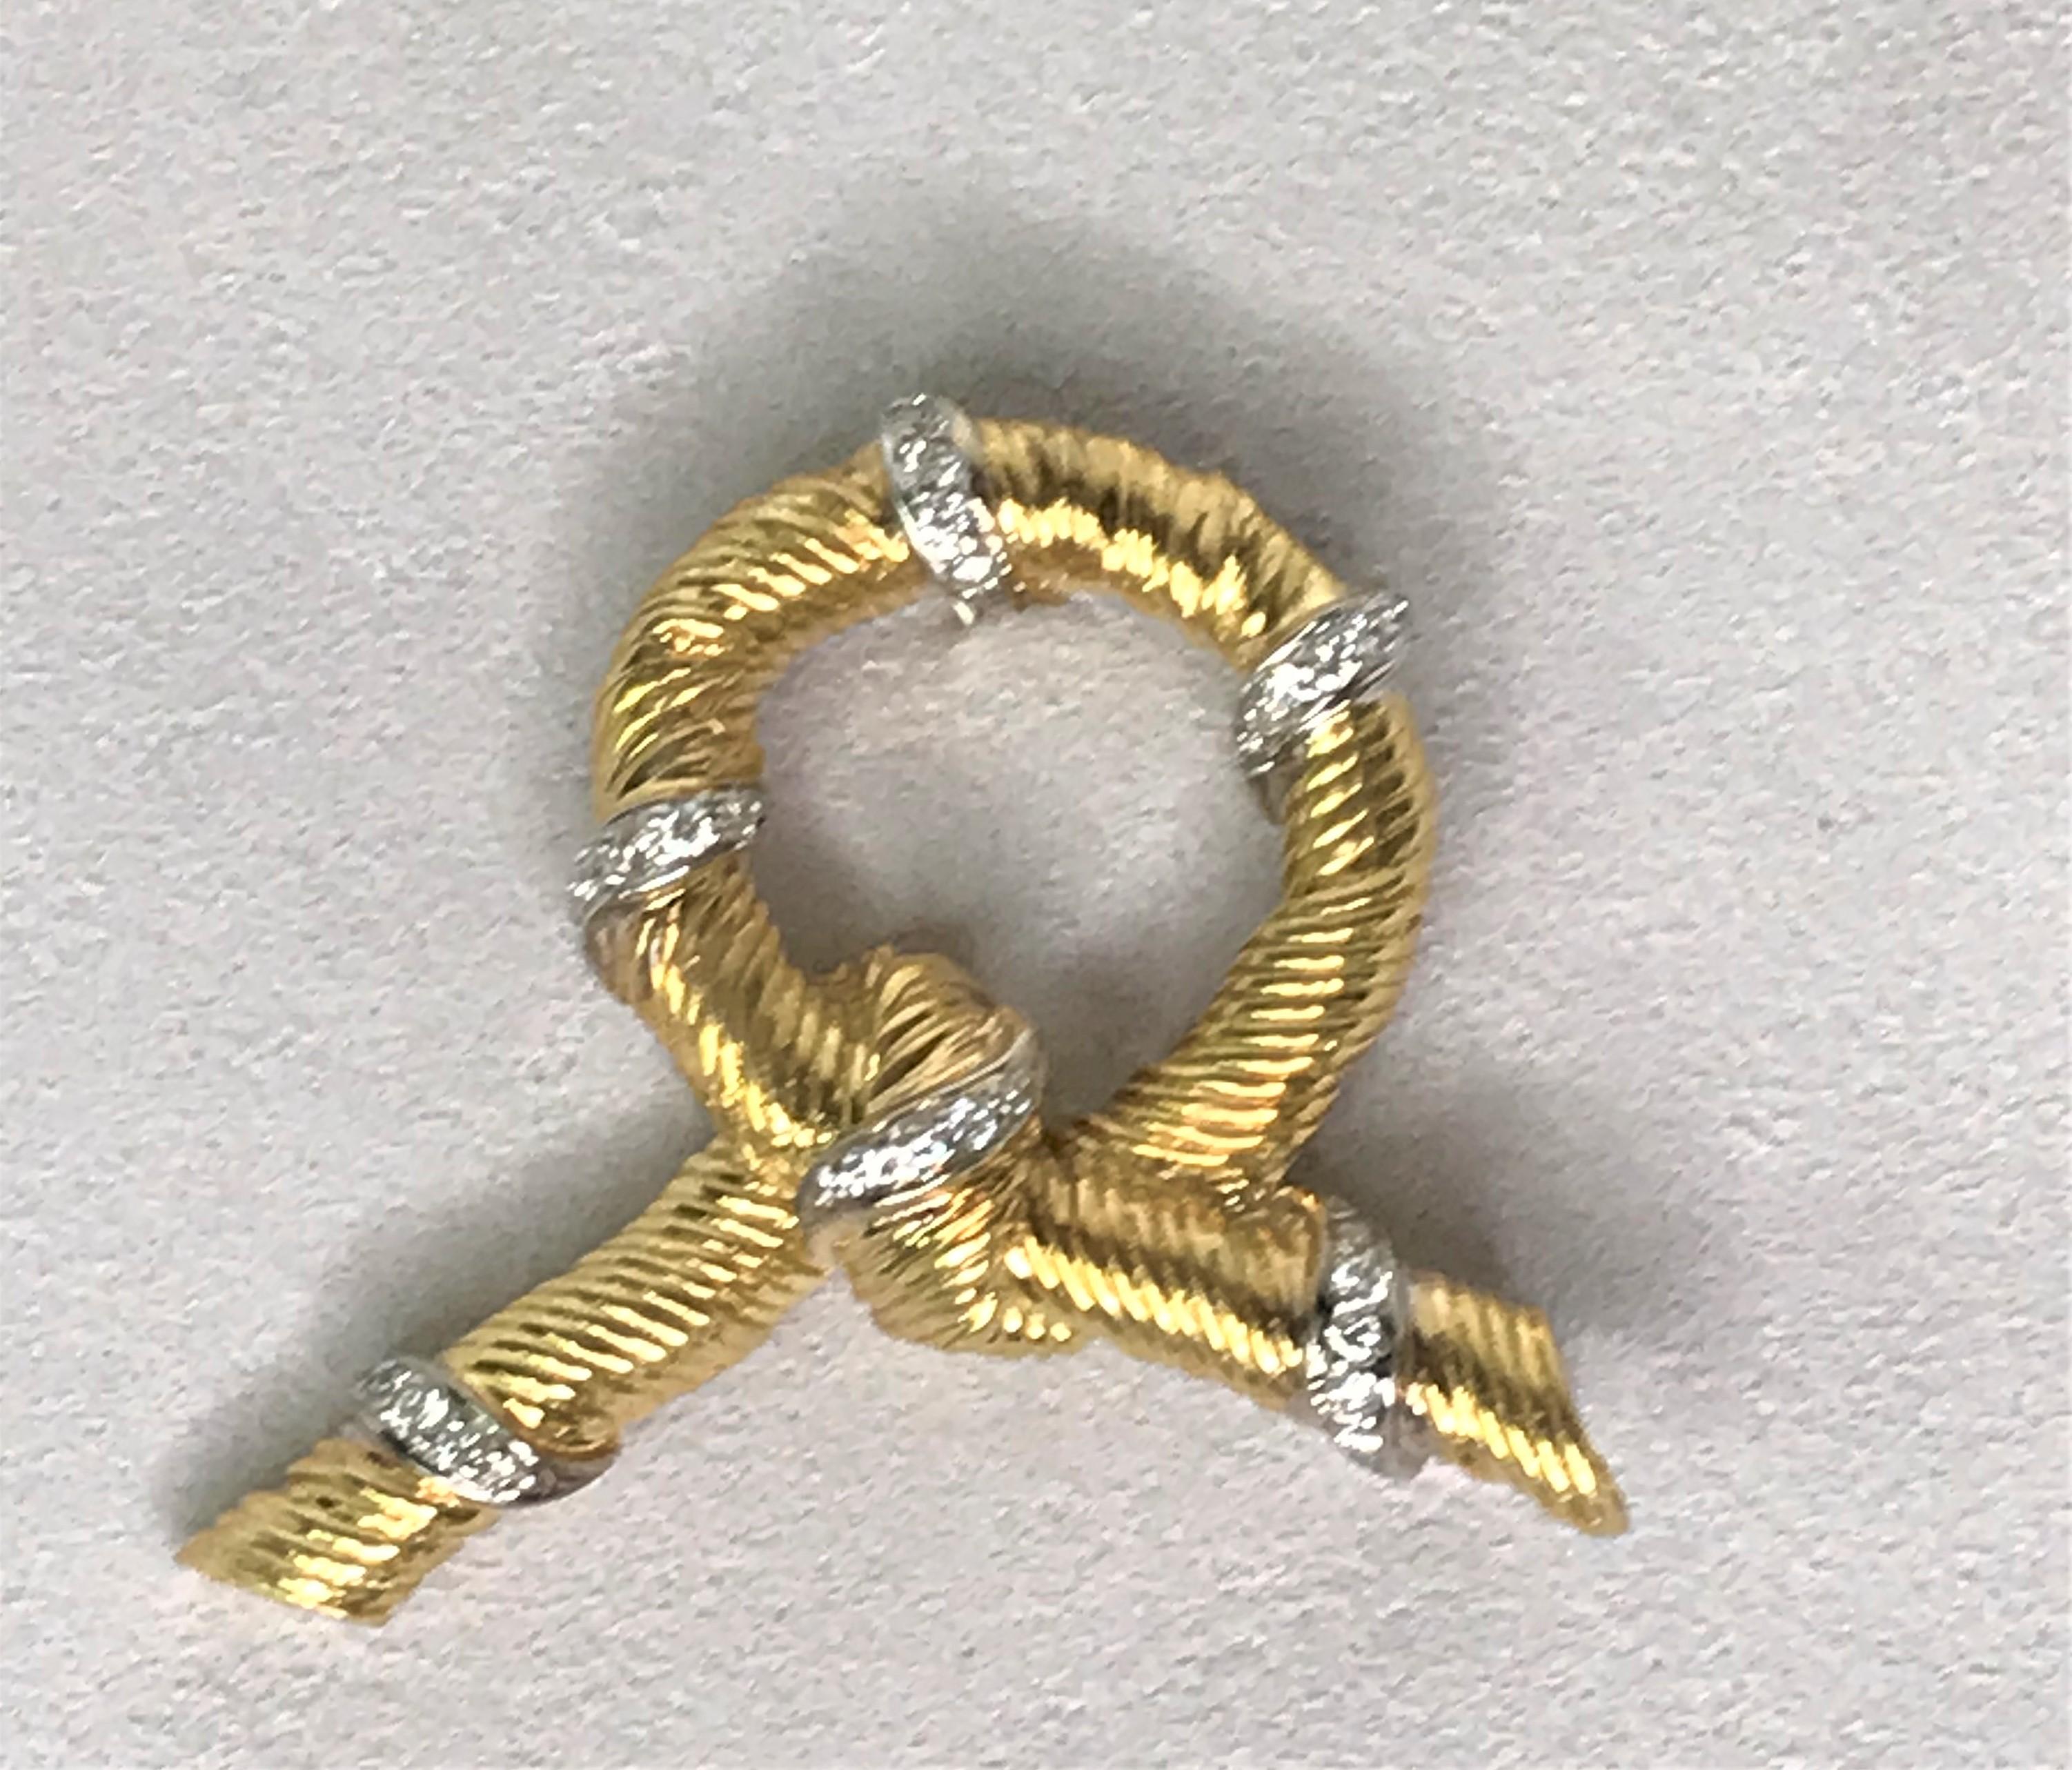 This piece shines and sparkles! 
18 karat yellow and white gold ribbed bow design.
Six stations of diamonds set in 18 karat white gold.  
30 round full cut diamonds, approximately .30tdw, VS-SI clarity, G-H color.
Stick pin with safety.
Overall